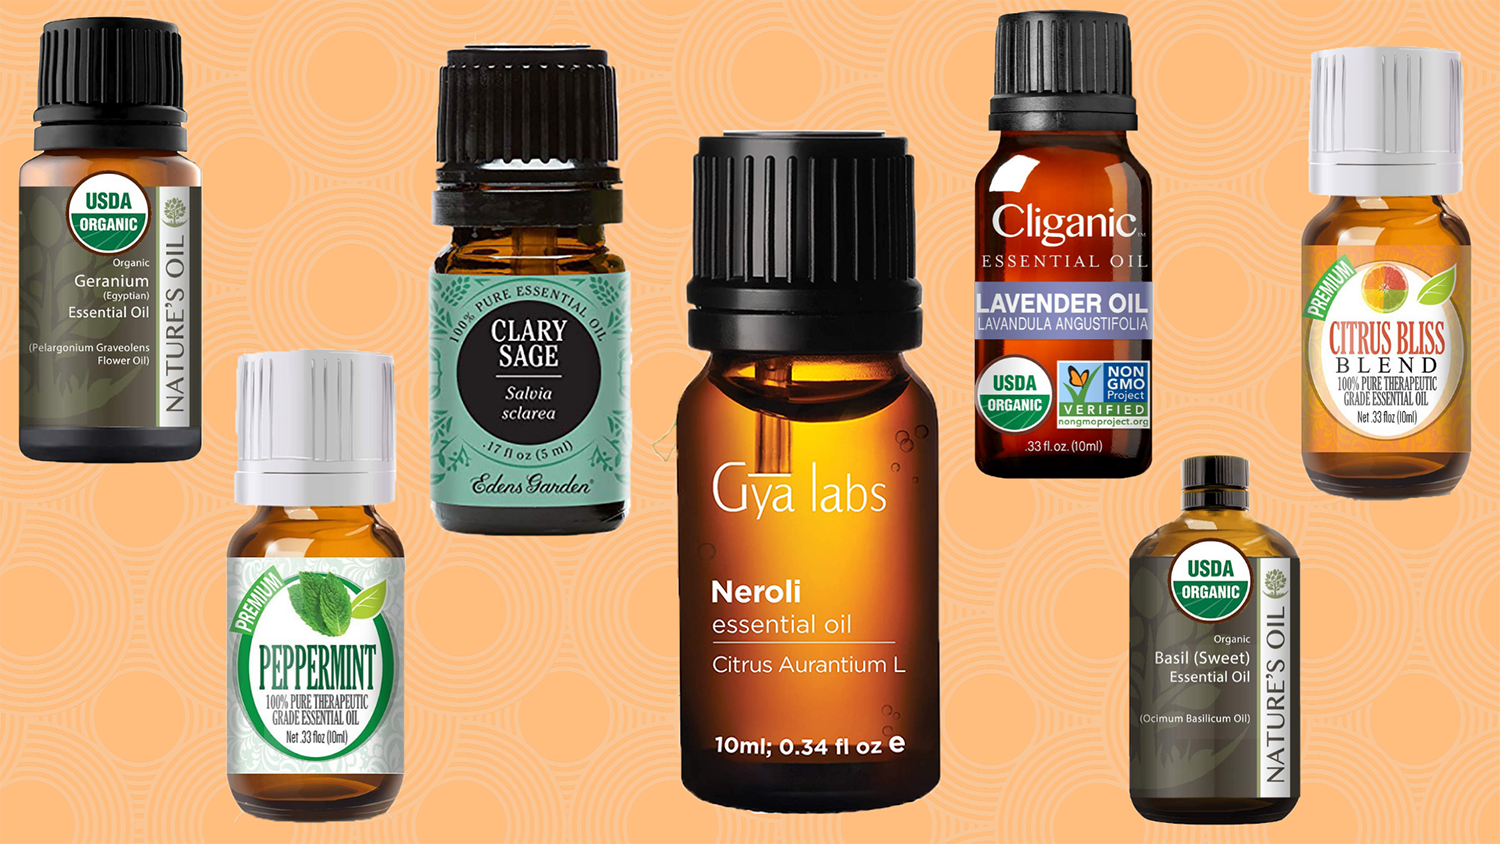 Shop Gya Labs' Sweet Orange Essential Oil: Experience the Citrus Bliss